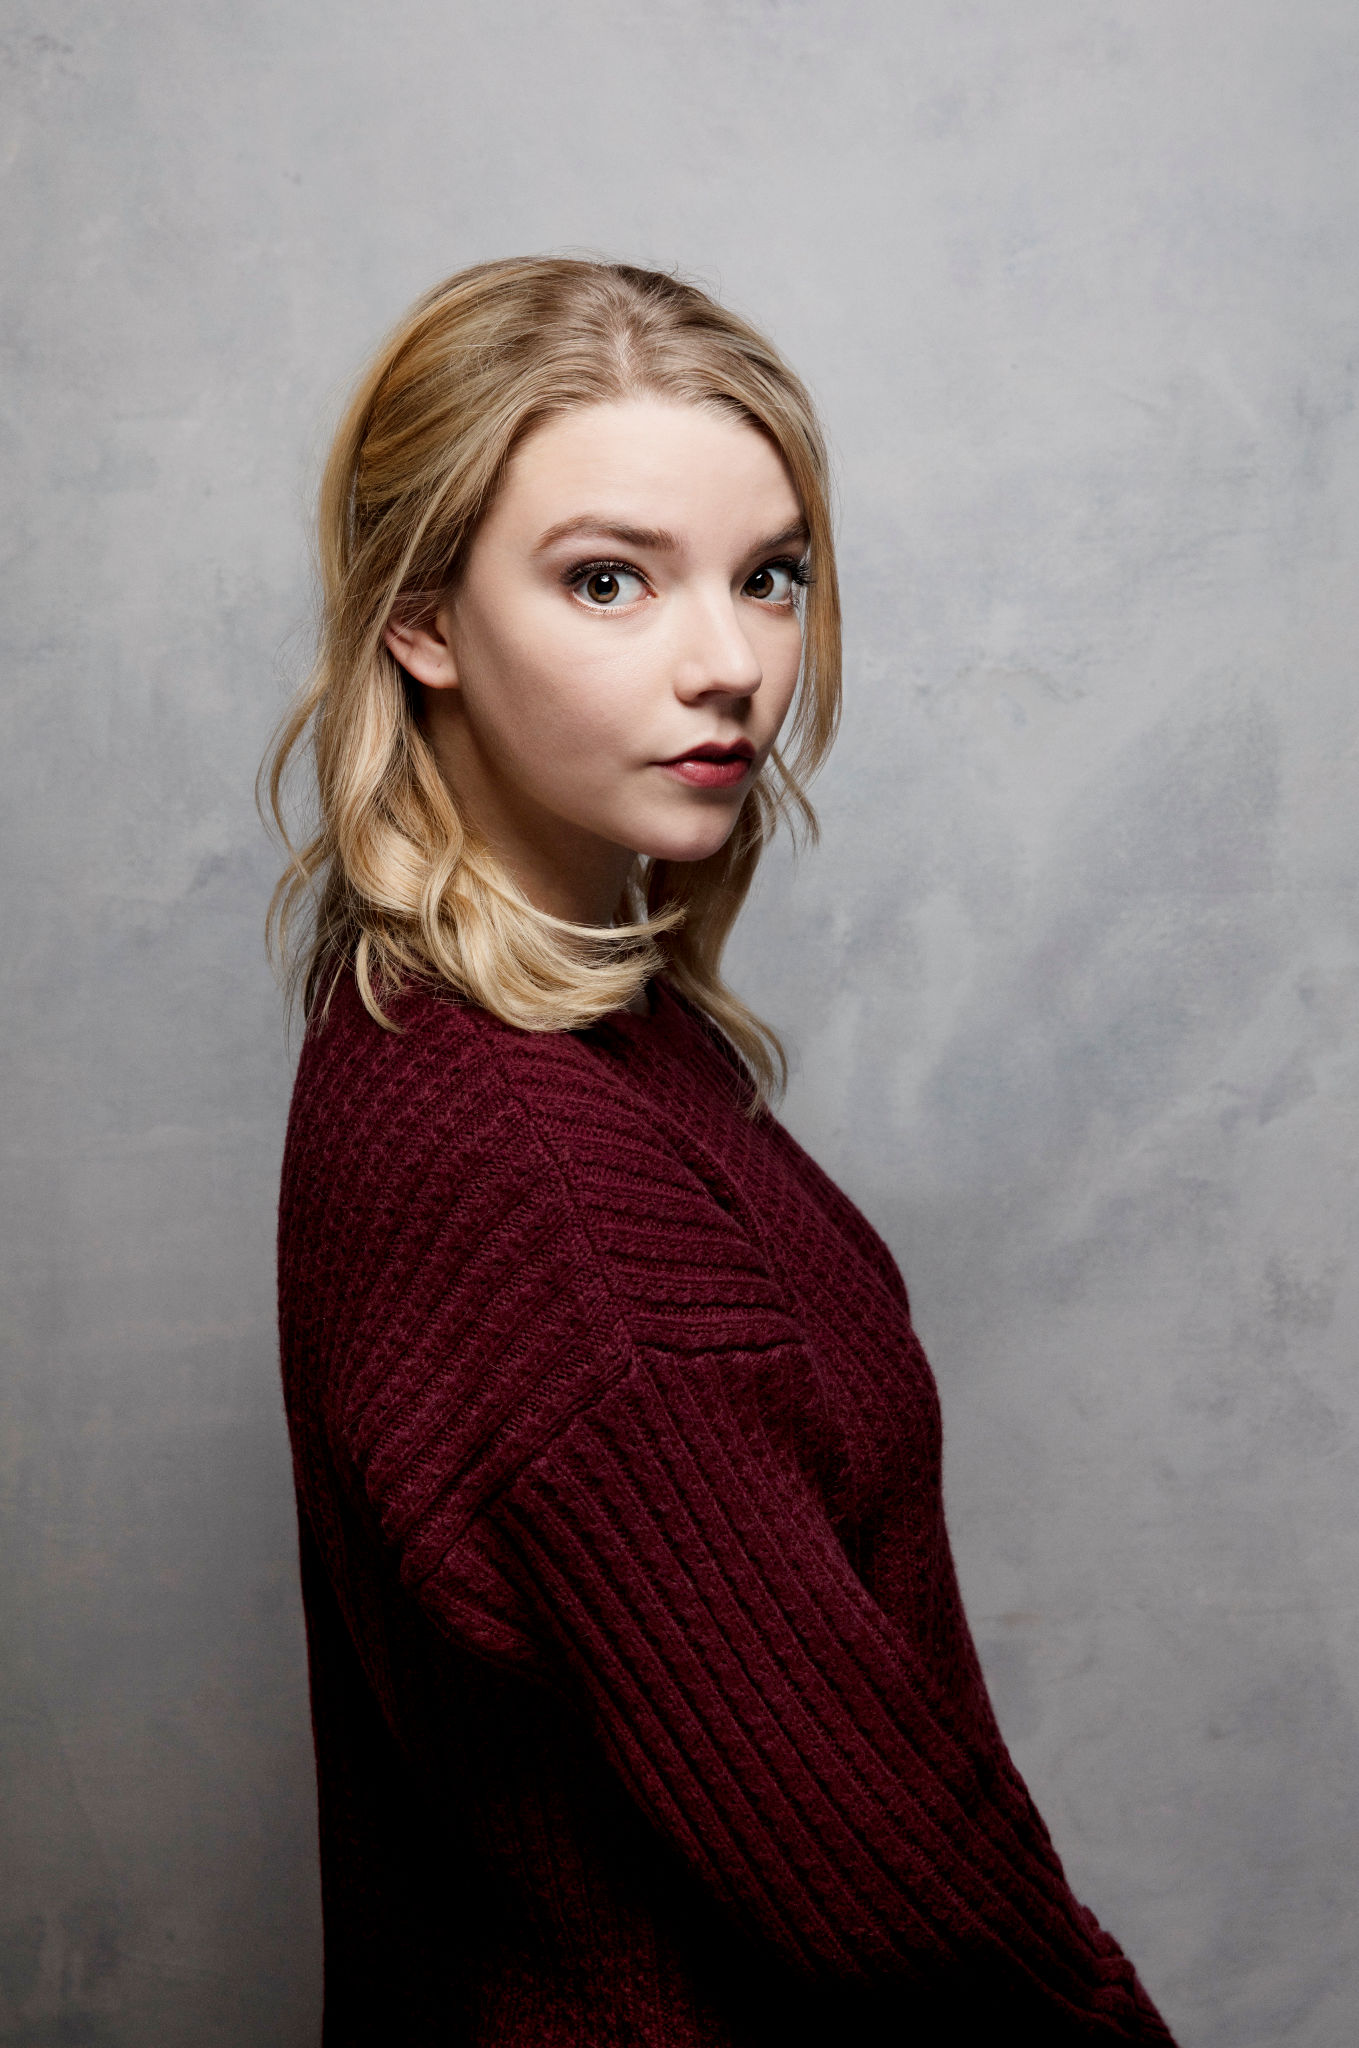 Anya Taylor Joy Women Actress Blonde Sweater Simple Background Looking At Viewer Portrait